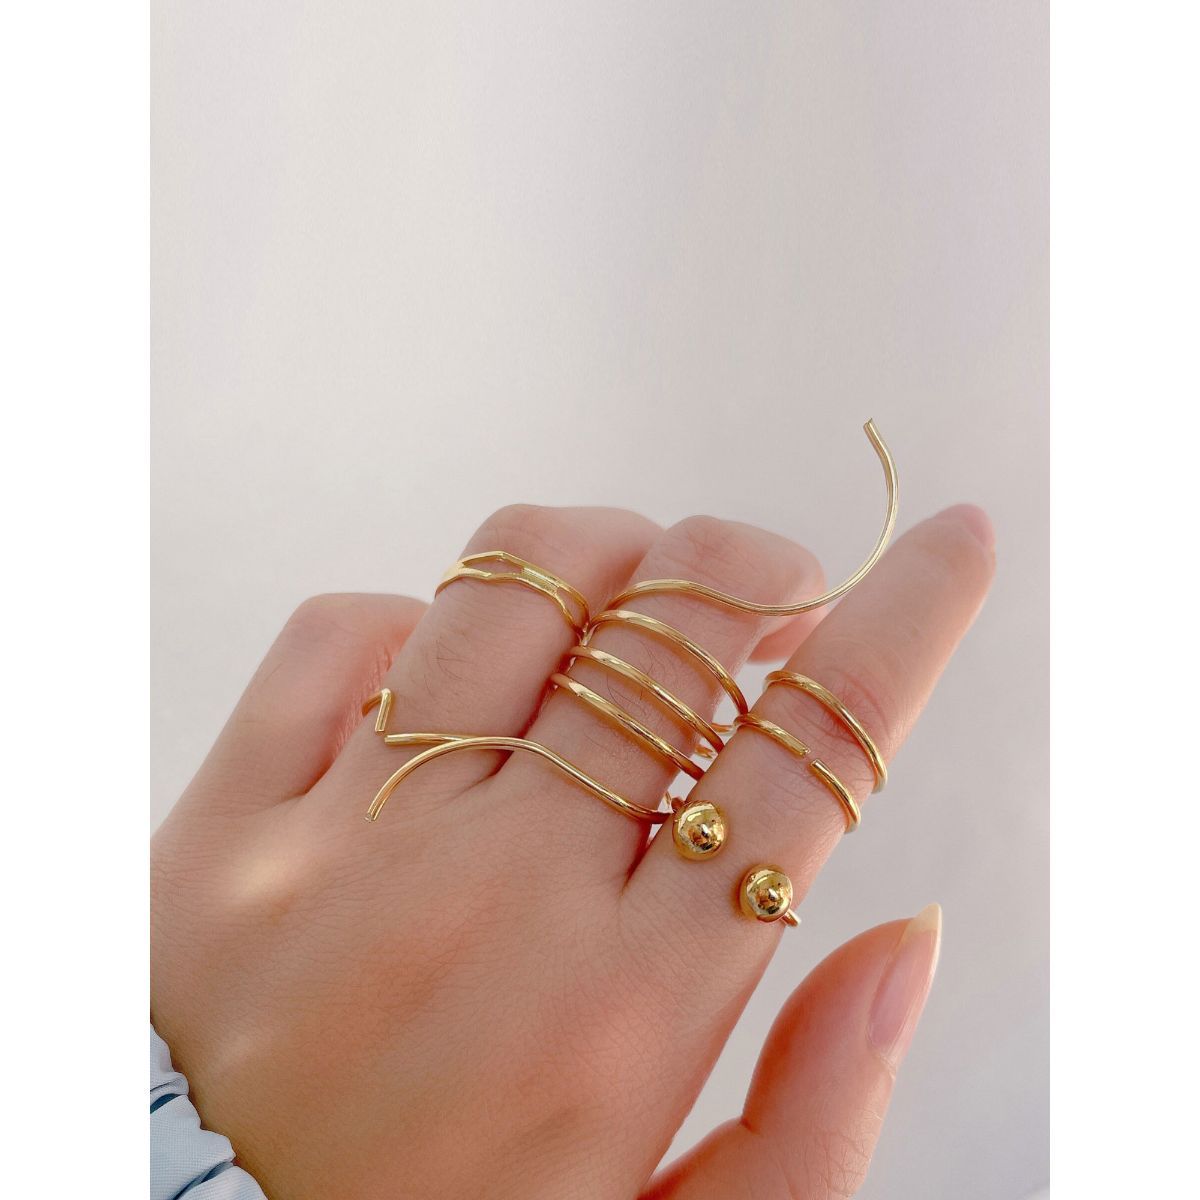 Jewels Galaxy Gold Plated Gold-Toned Rings (Set of 5)